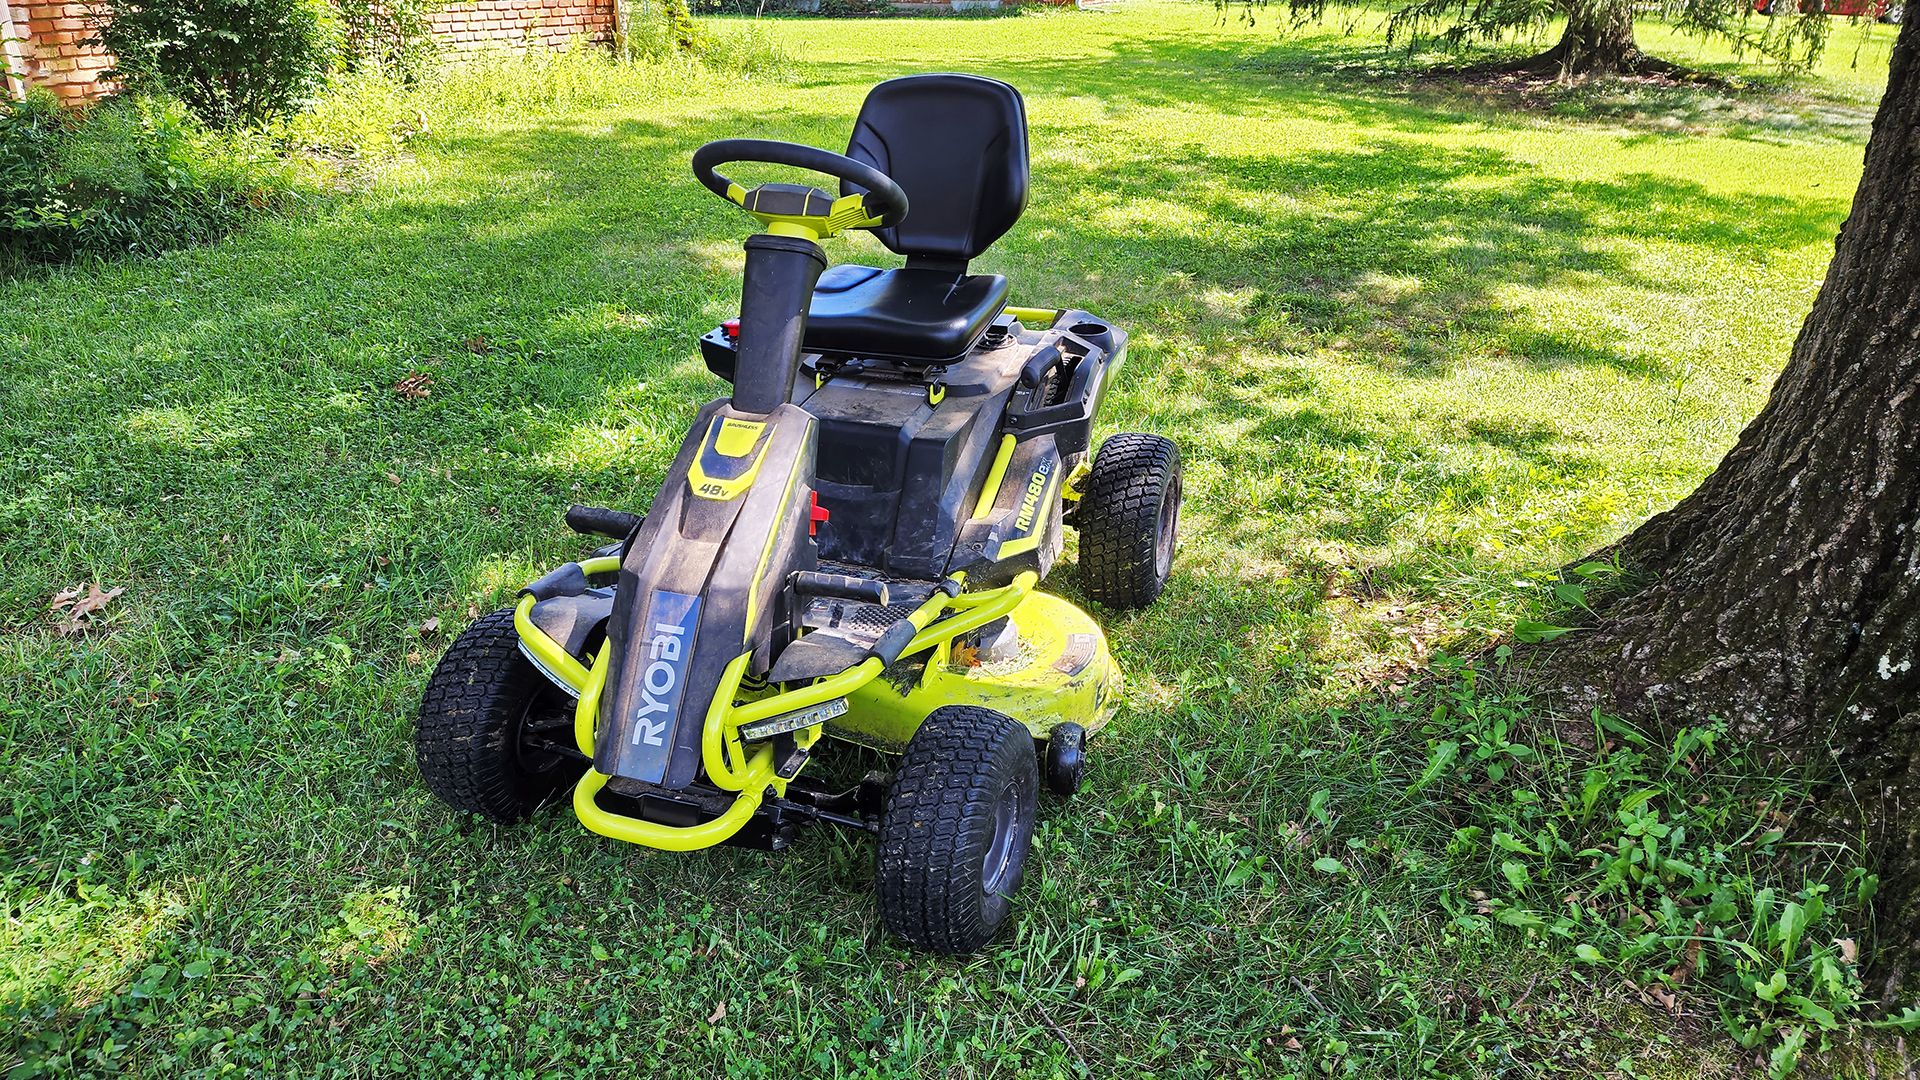 Why You Shouldn't Buy an Electric Riding Lawn Mower